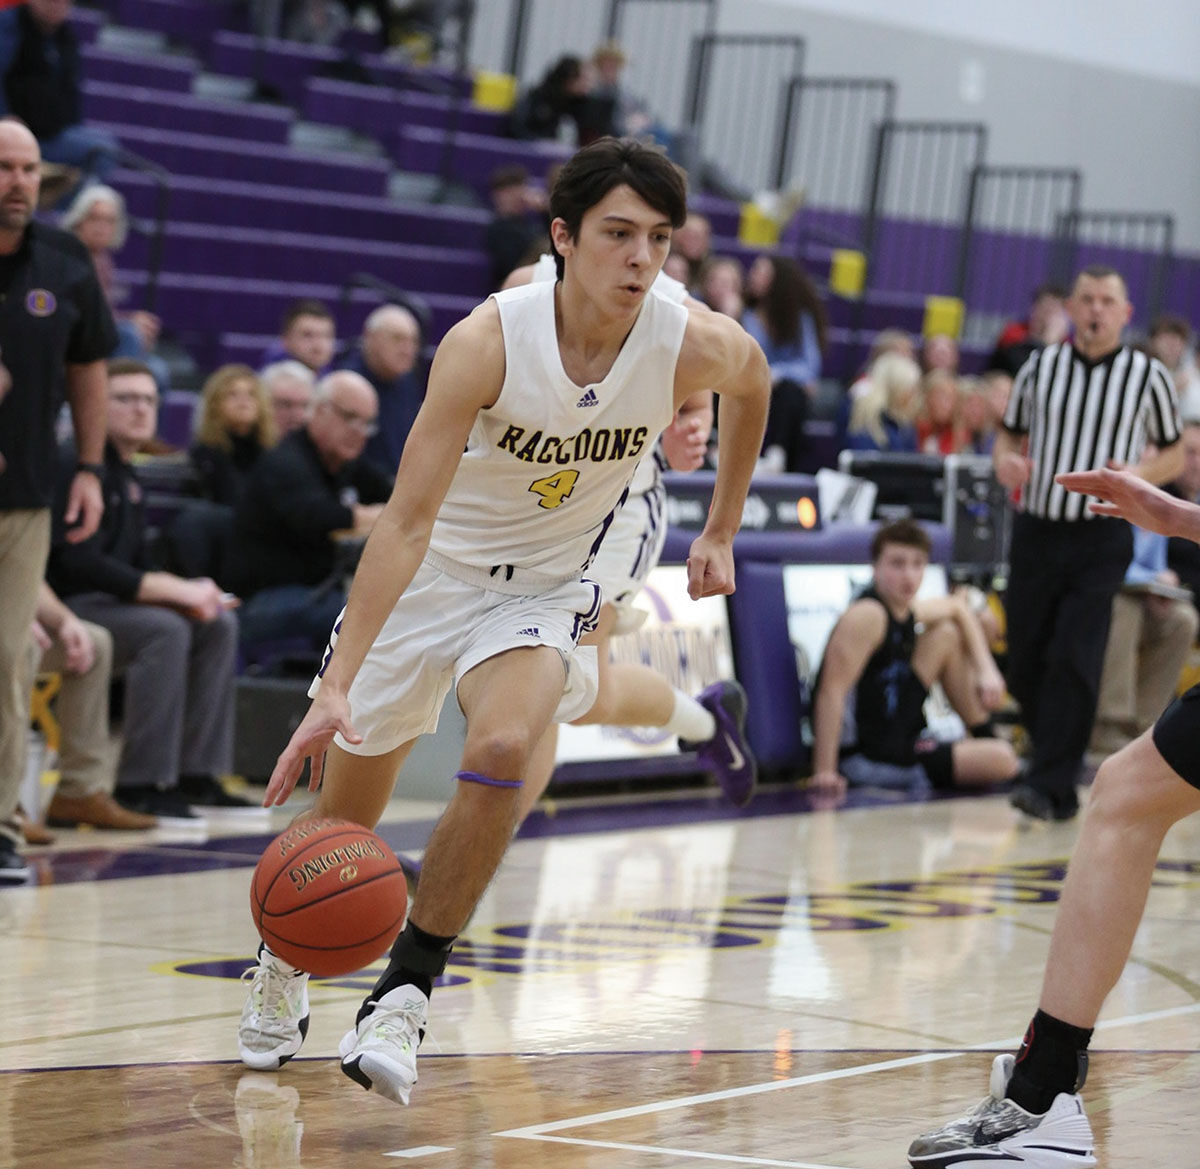 Oconomowoc Boys Basketball Thrives in Classic 8 Conference with Strong Performances